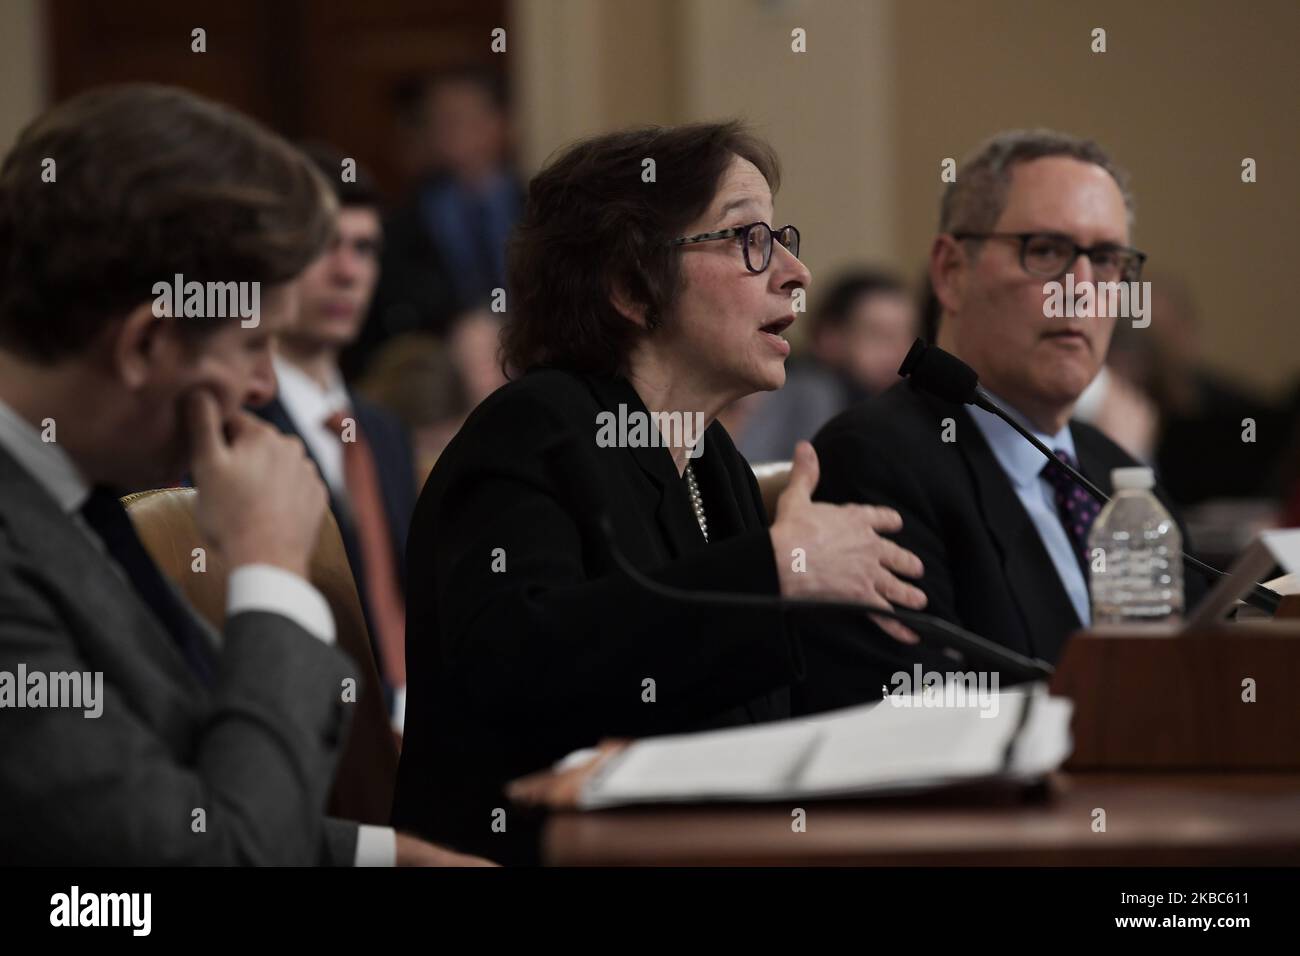 Laws Professors (left to right) Noah Feldman, Pamela S. Karlan, Michael Gerhardt testify today Wednesday 04, 2019 during a hearing of the House Judiciary Committee, as part of the Donald Trump impeachment inquiry, Longworth Building in Washington DC. (Photo by Lenin Nolly/NurPhoto) Stock Photo